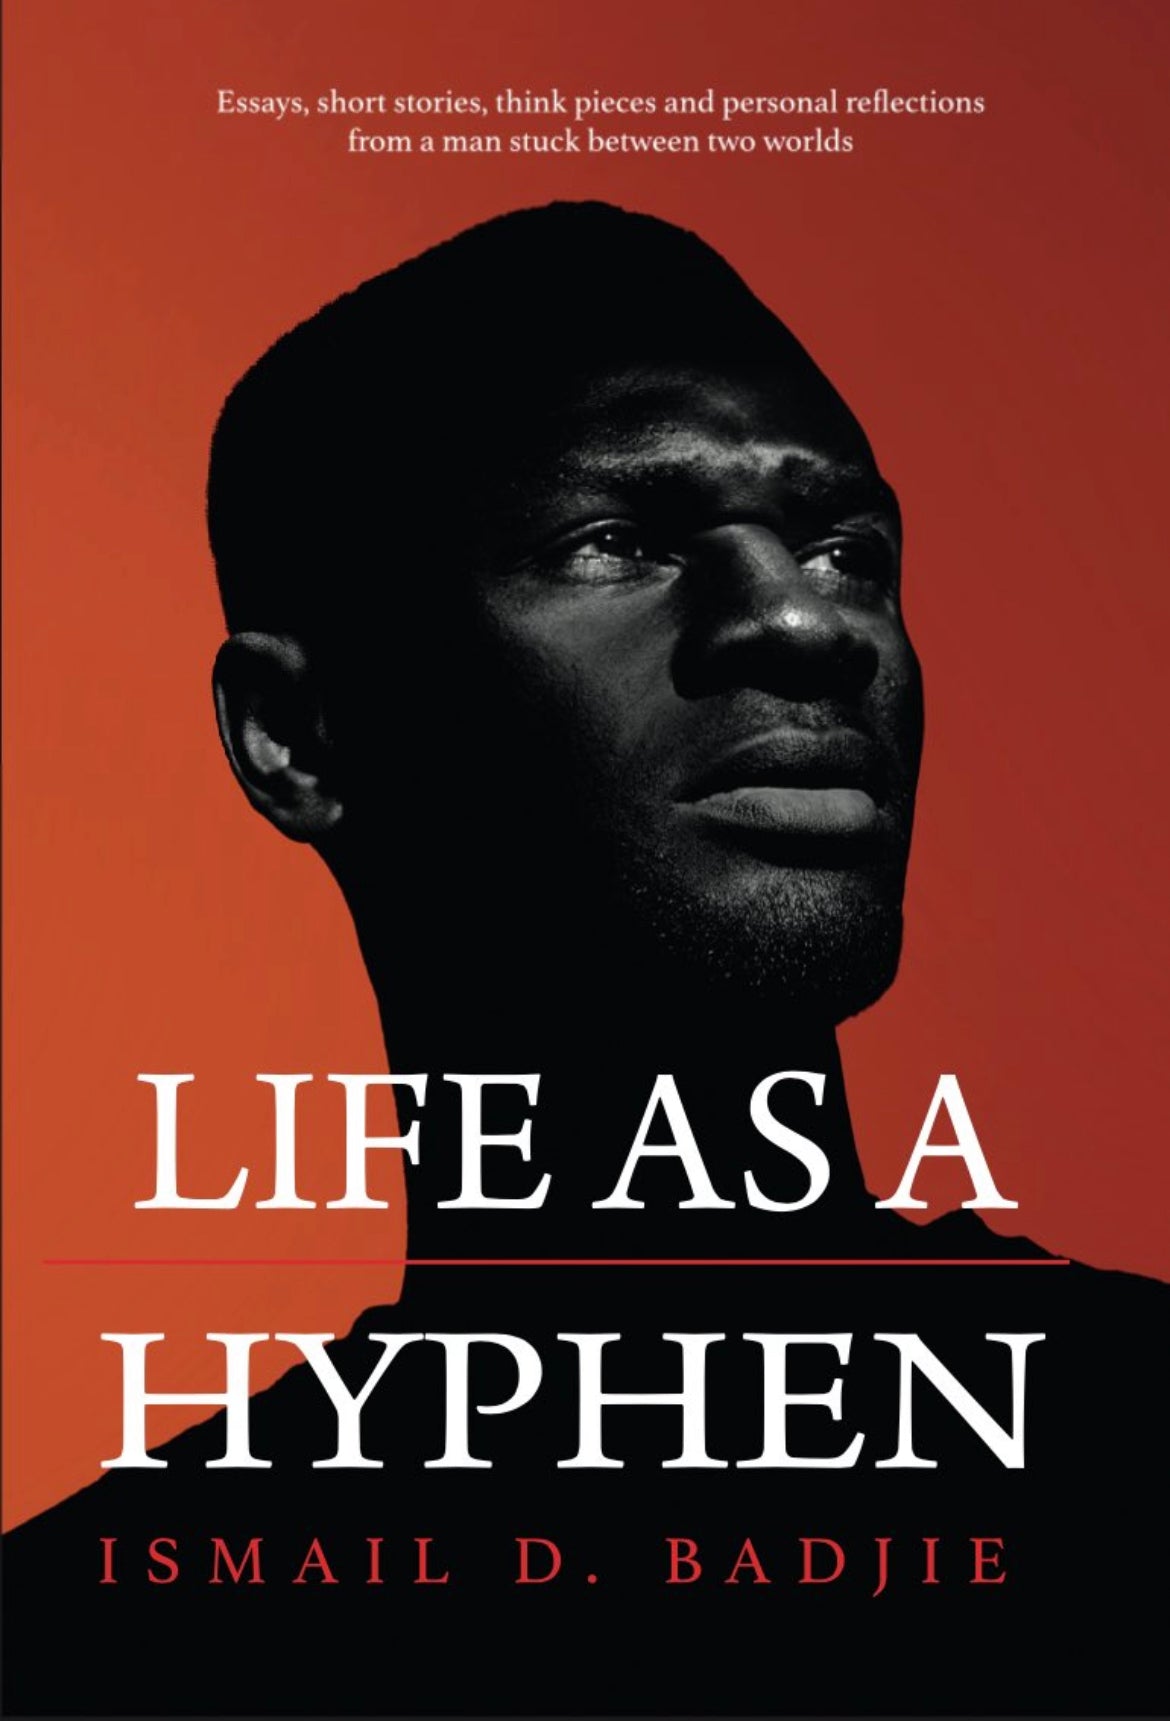 LIFE AS A HYPEN (Hardcover w/ Author Signature)